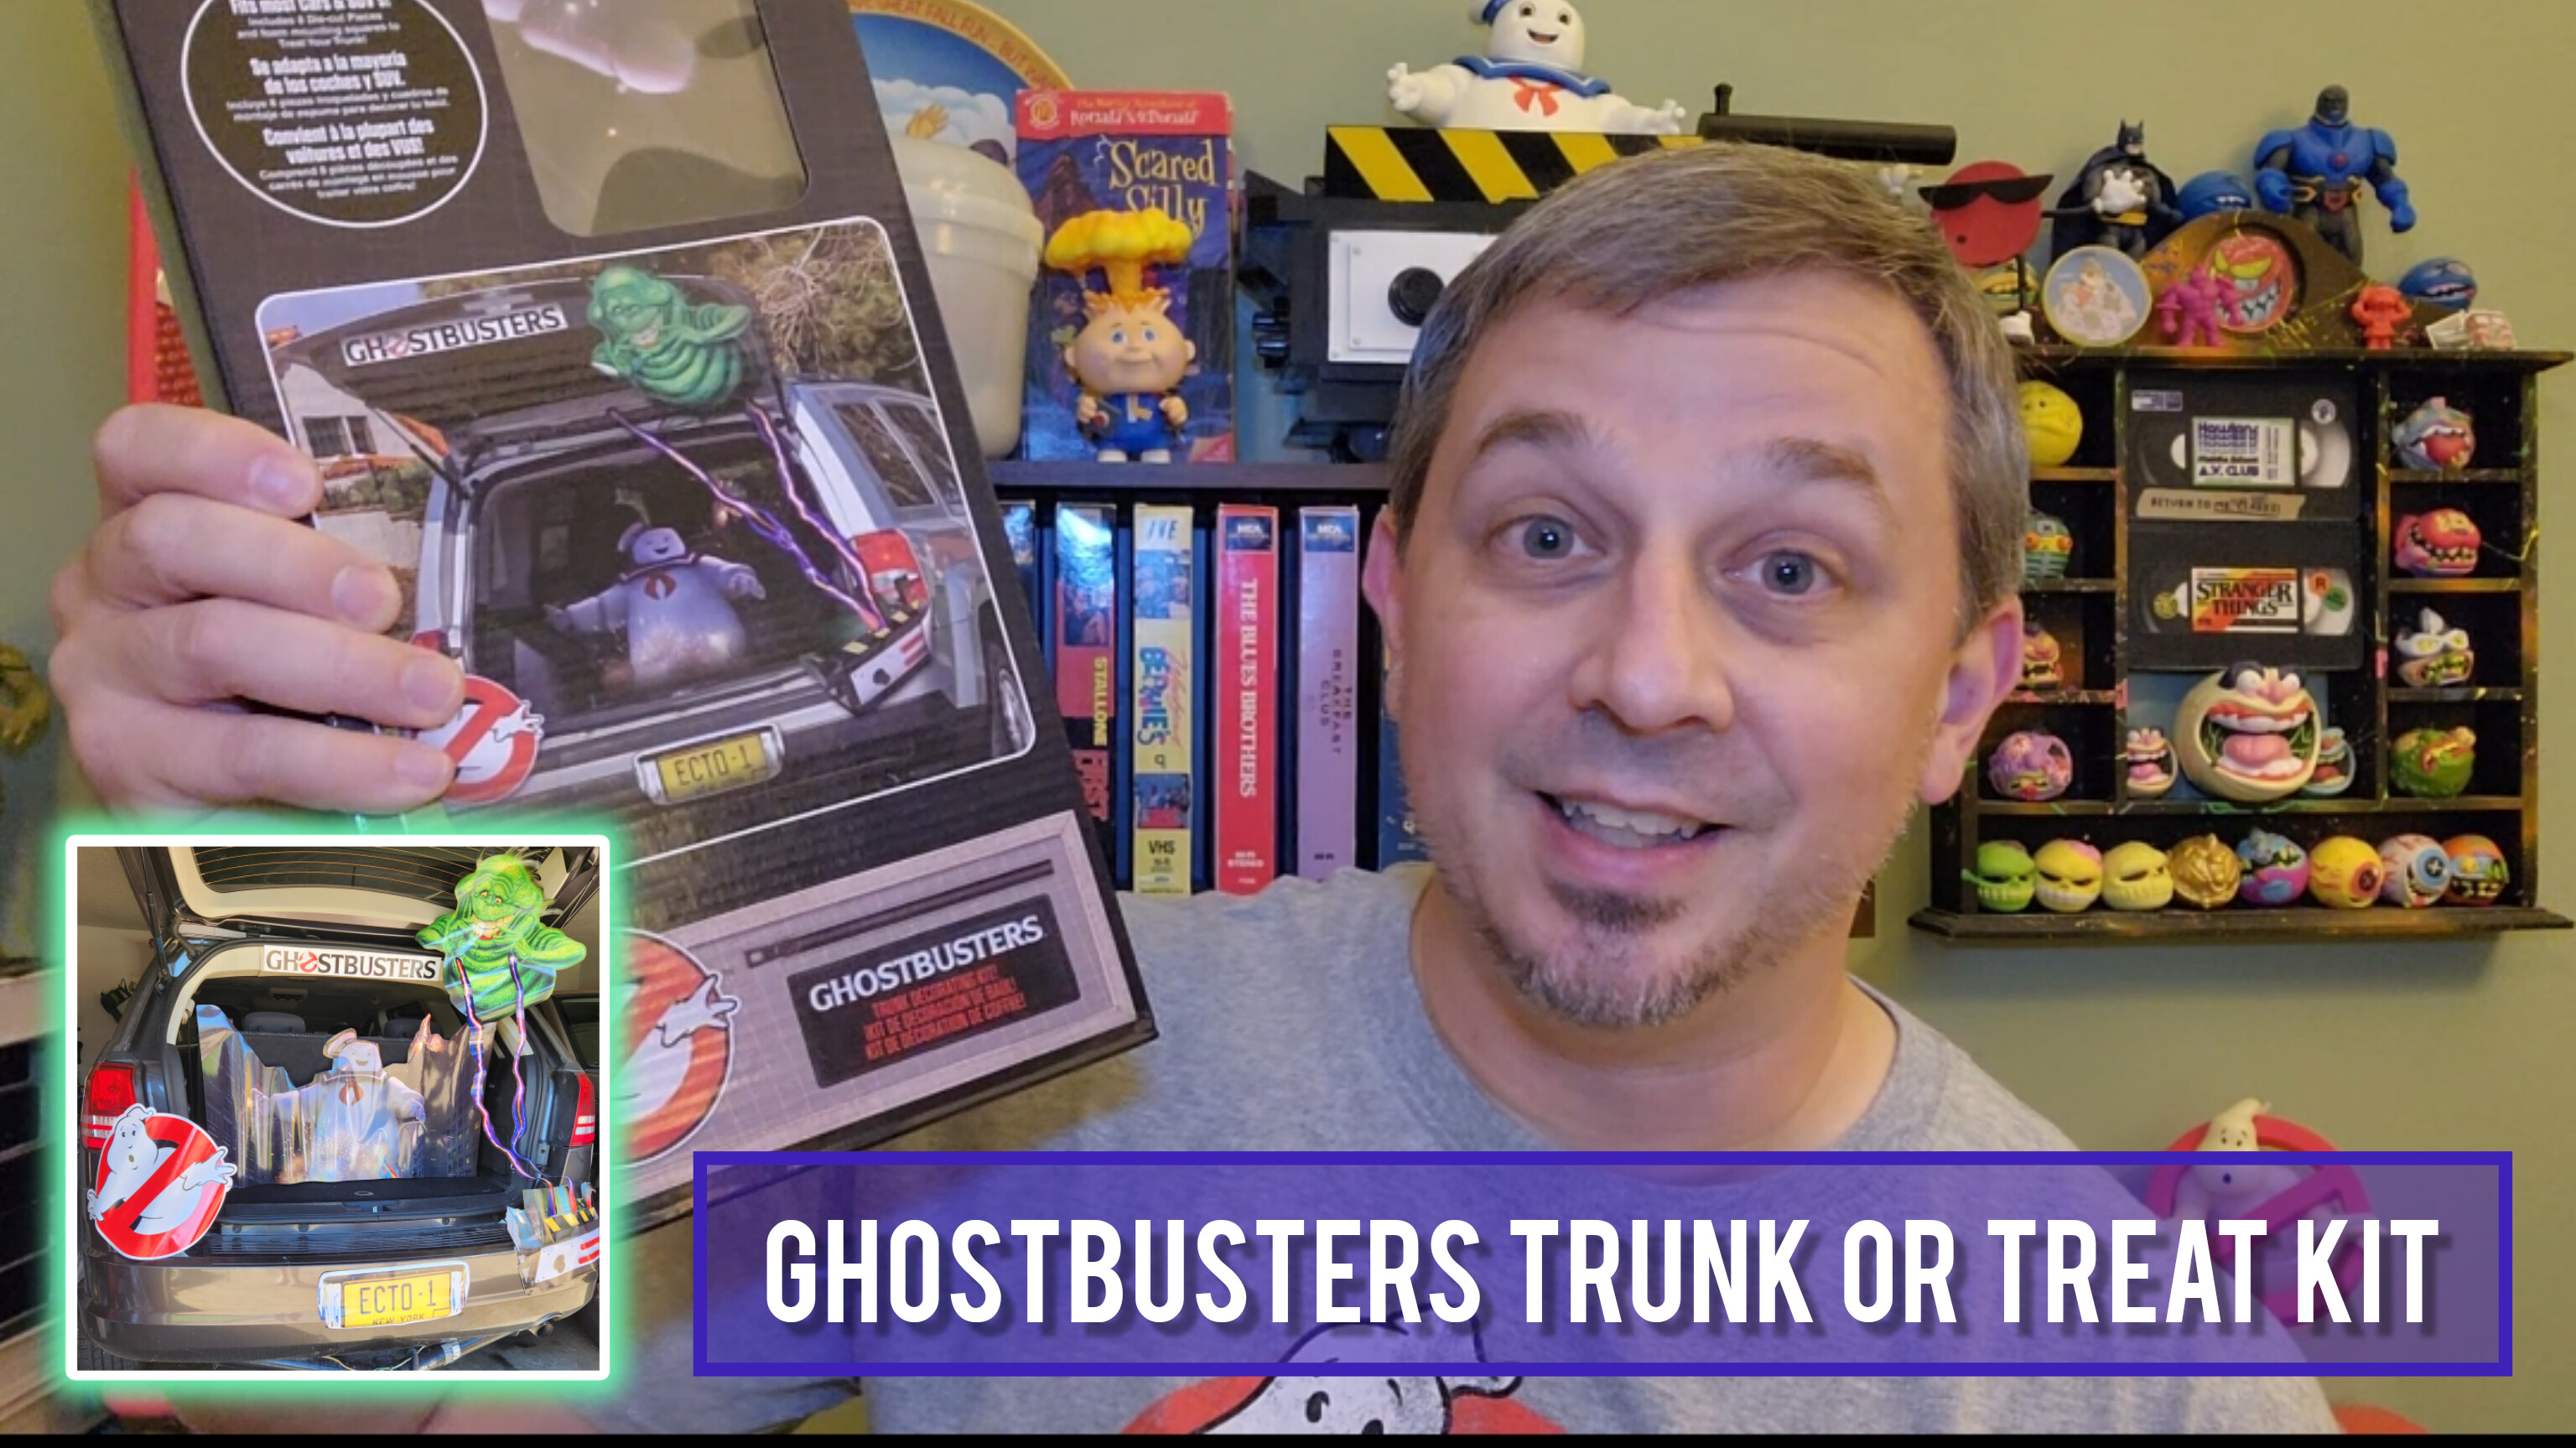 REVIEW: Ghostbusters Trunk or Treat Kit